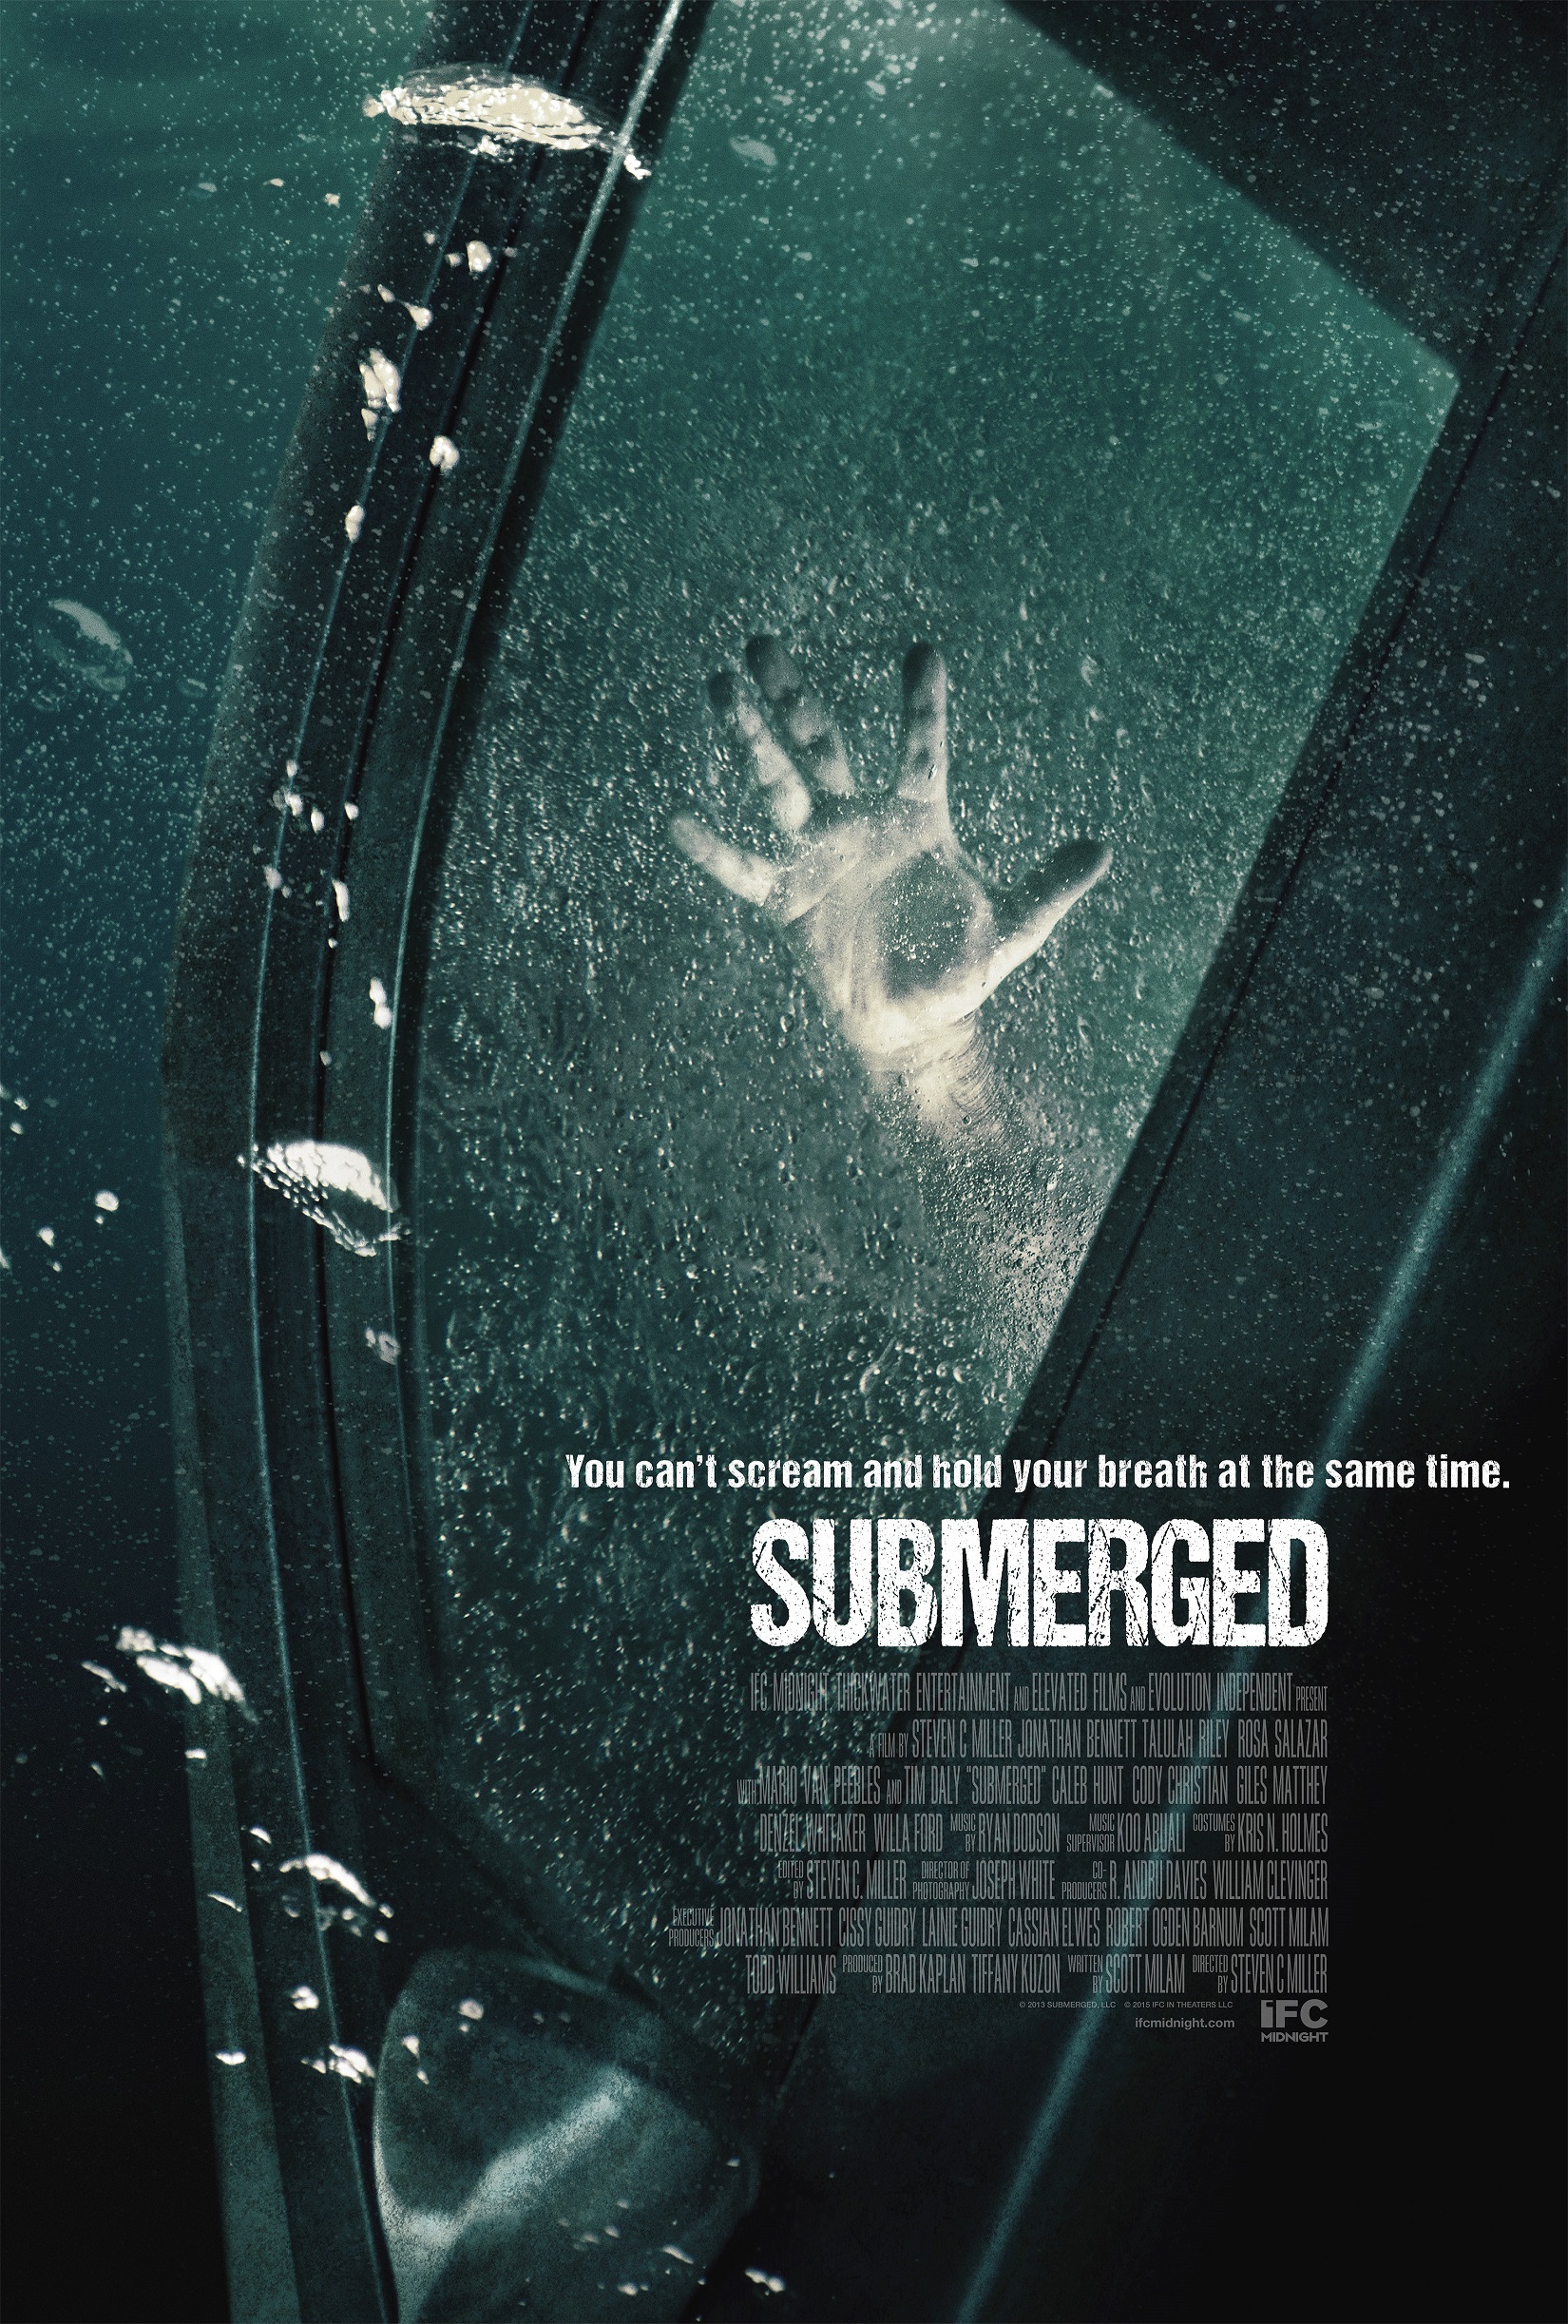 Submerged Horror Aliens Zombies Vampires Creature Features And More From Ifc Midnight A